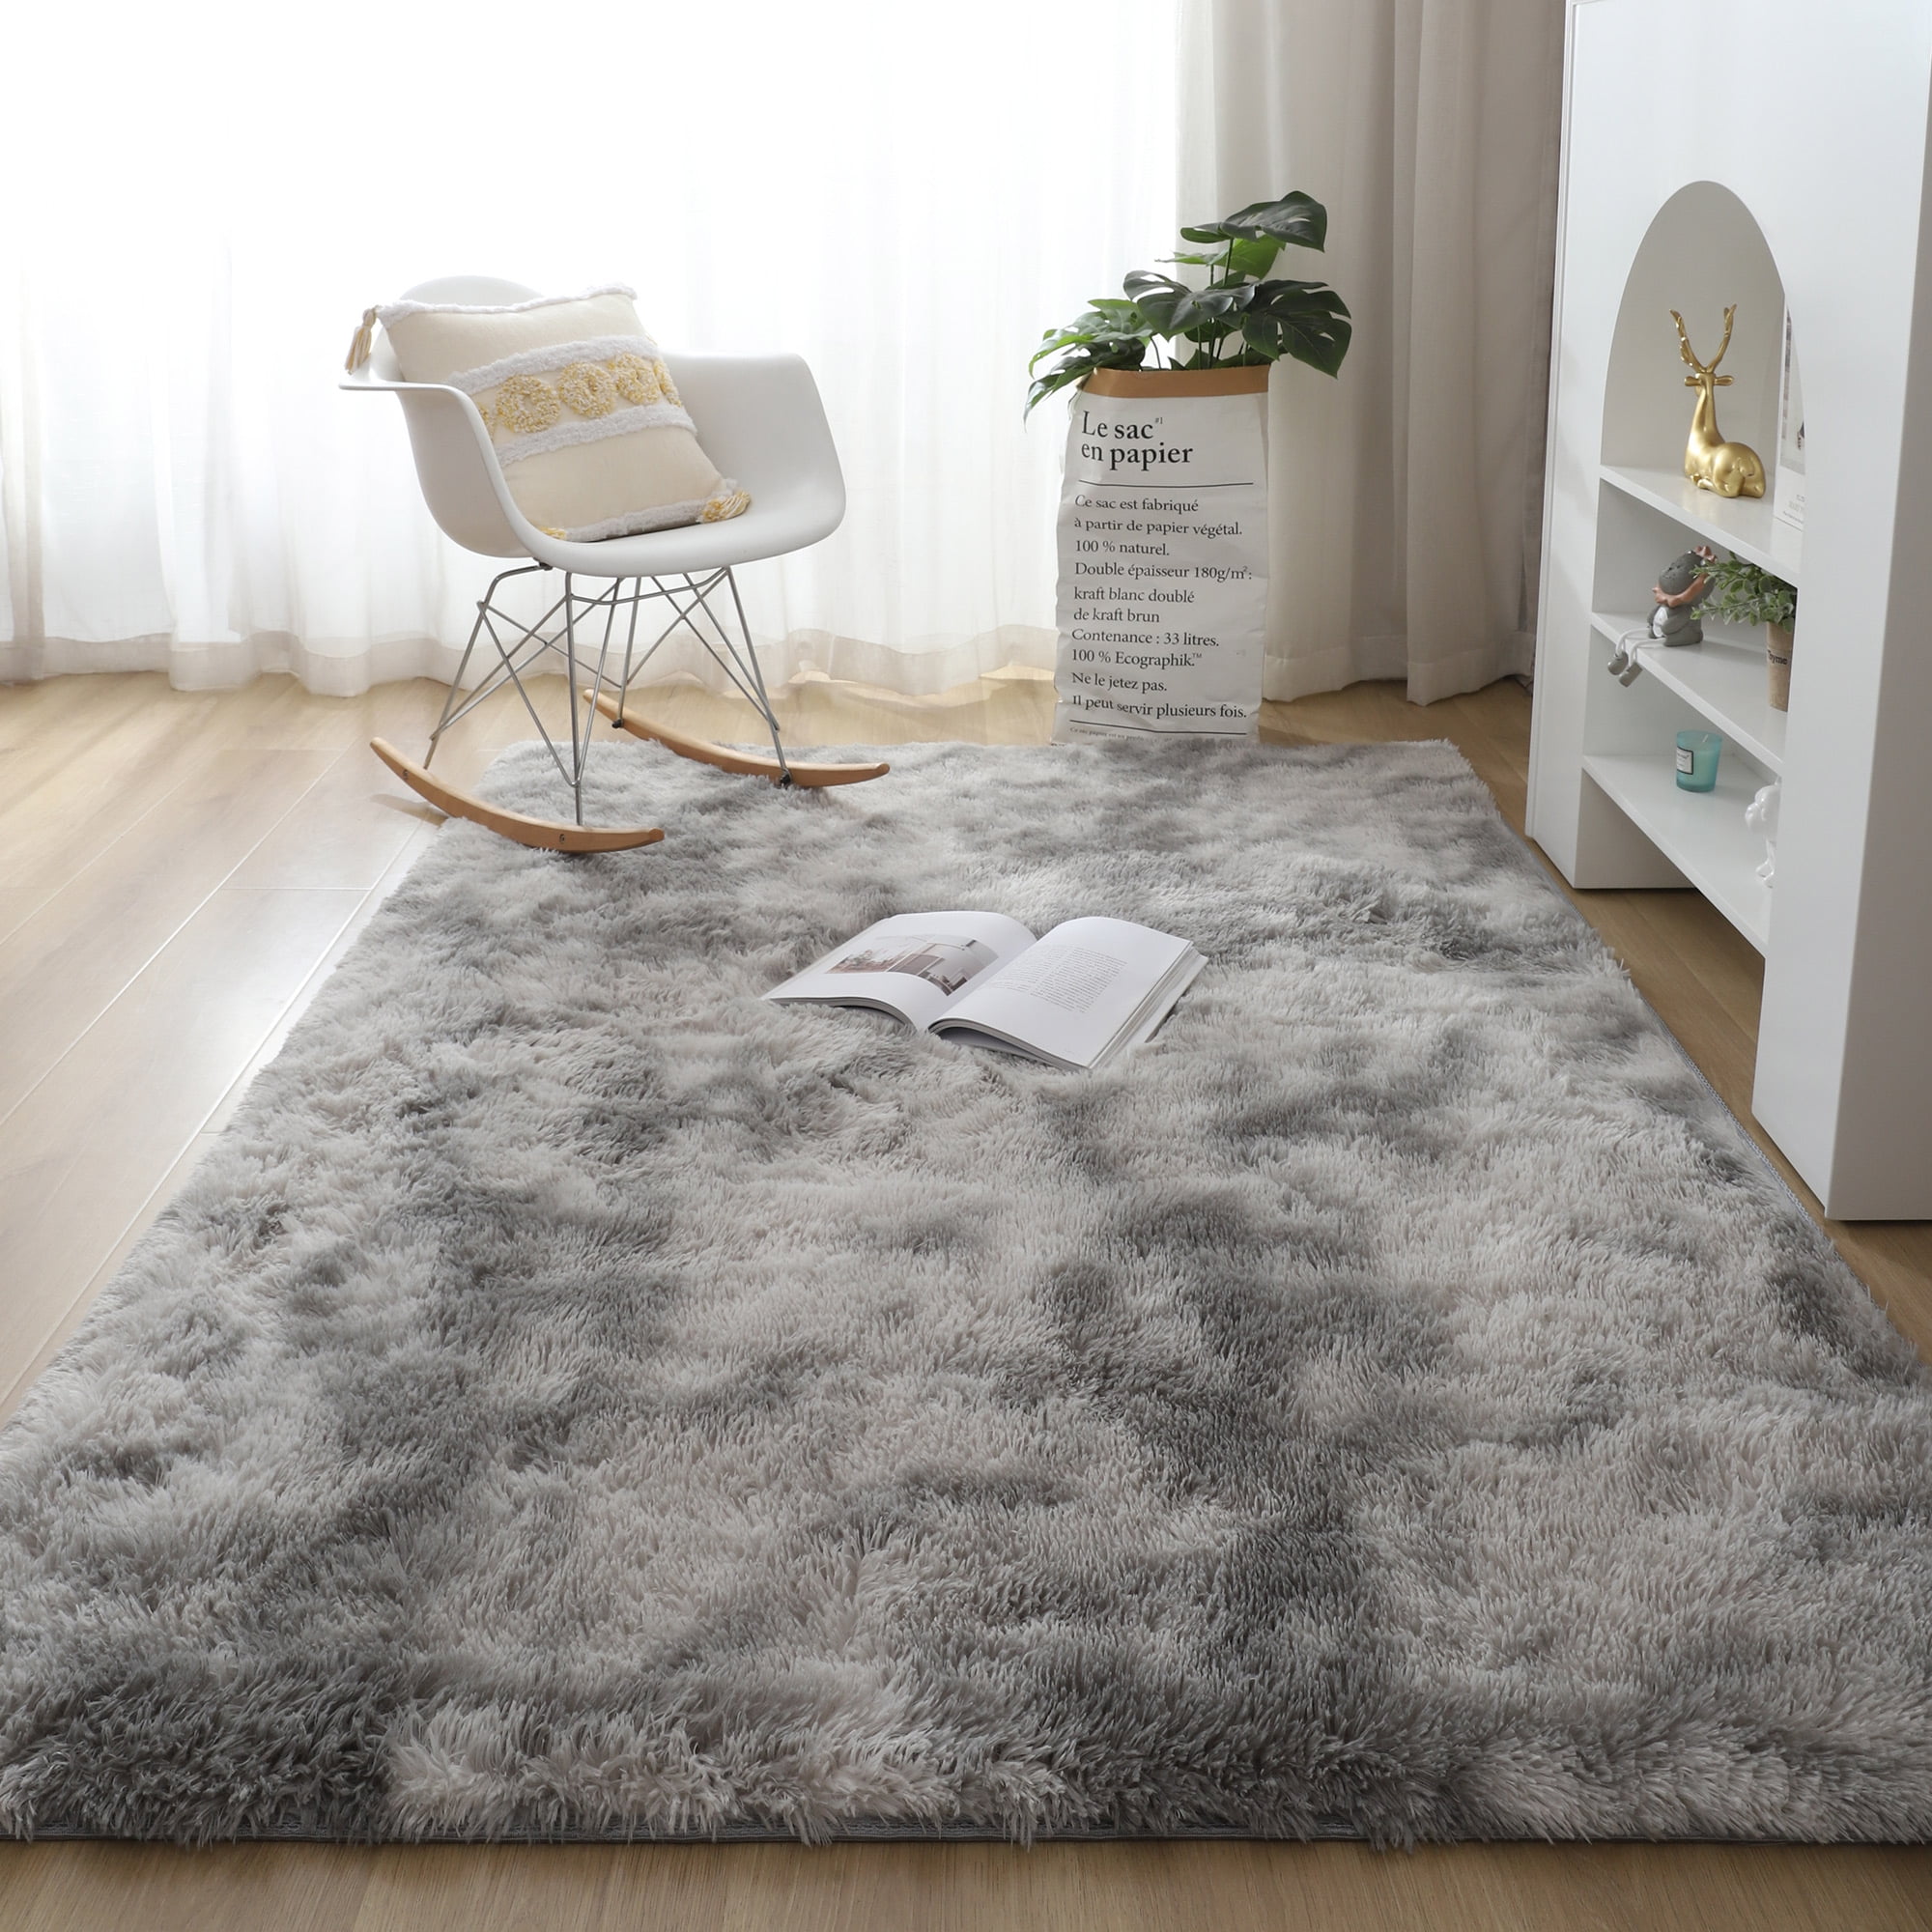 Large Shaggy Rugs for Living Room Best Selling Shag Pile Fluffy Super Soft Mats 